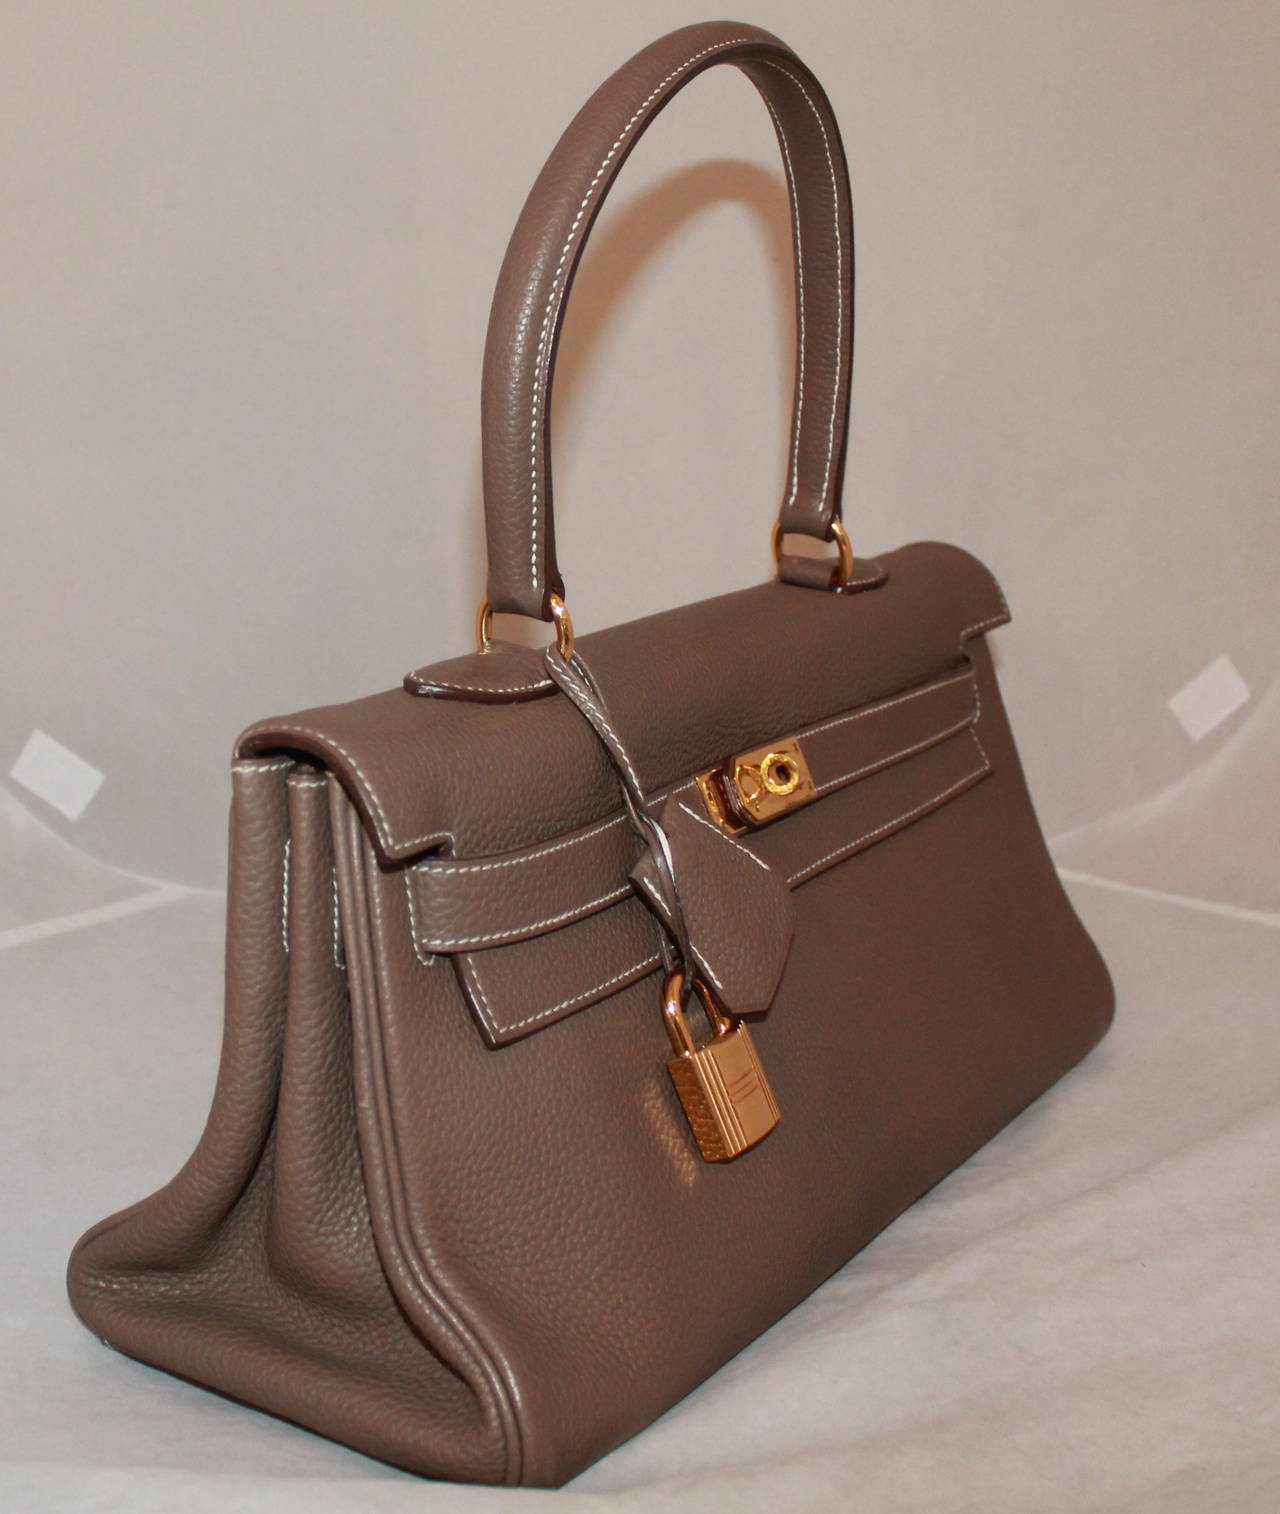 Hermes Etoupe Togo JPG II Shoulder Birkin GHW - circa 2009. The leather on this bag is in excellent condition, but the hardware on the front is scratched. It should be able to be buffed out if taken to Hermes for the spa treatment. Comes with duster